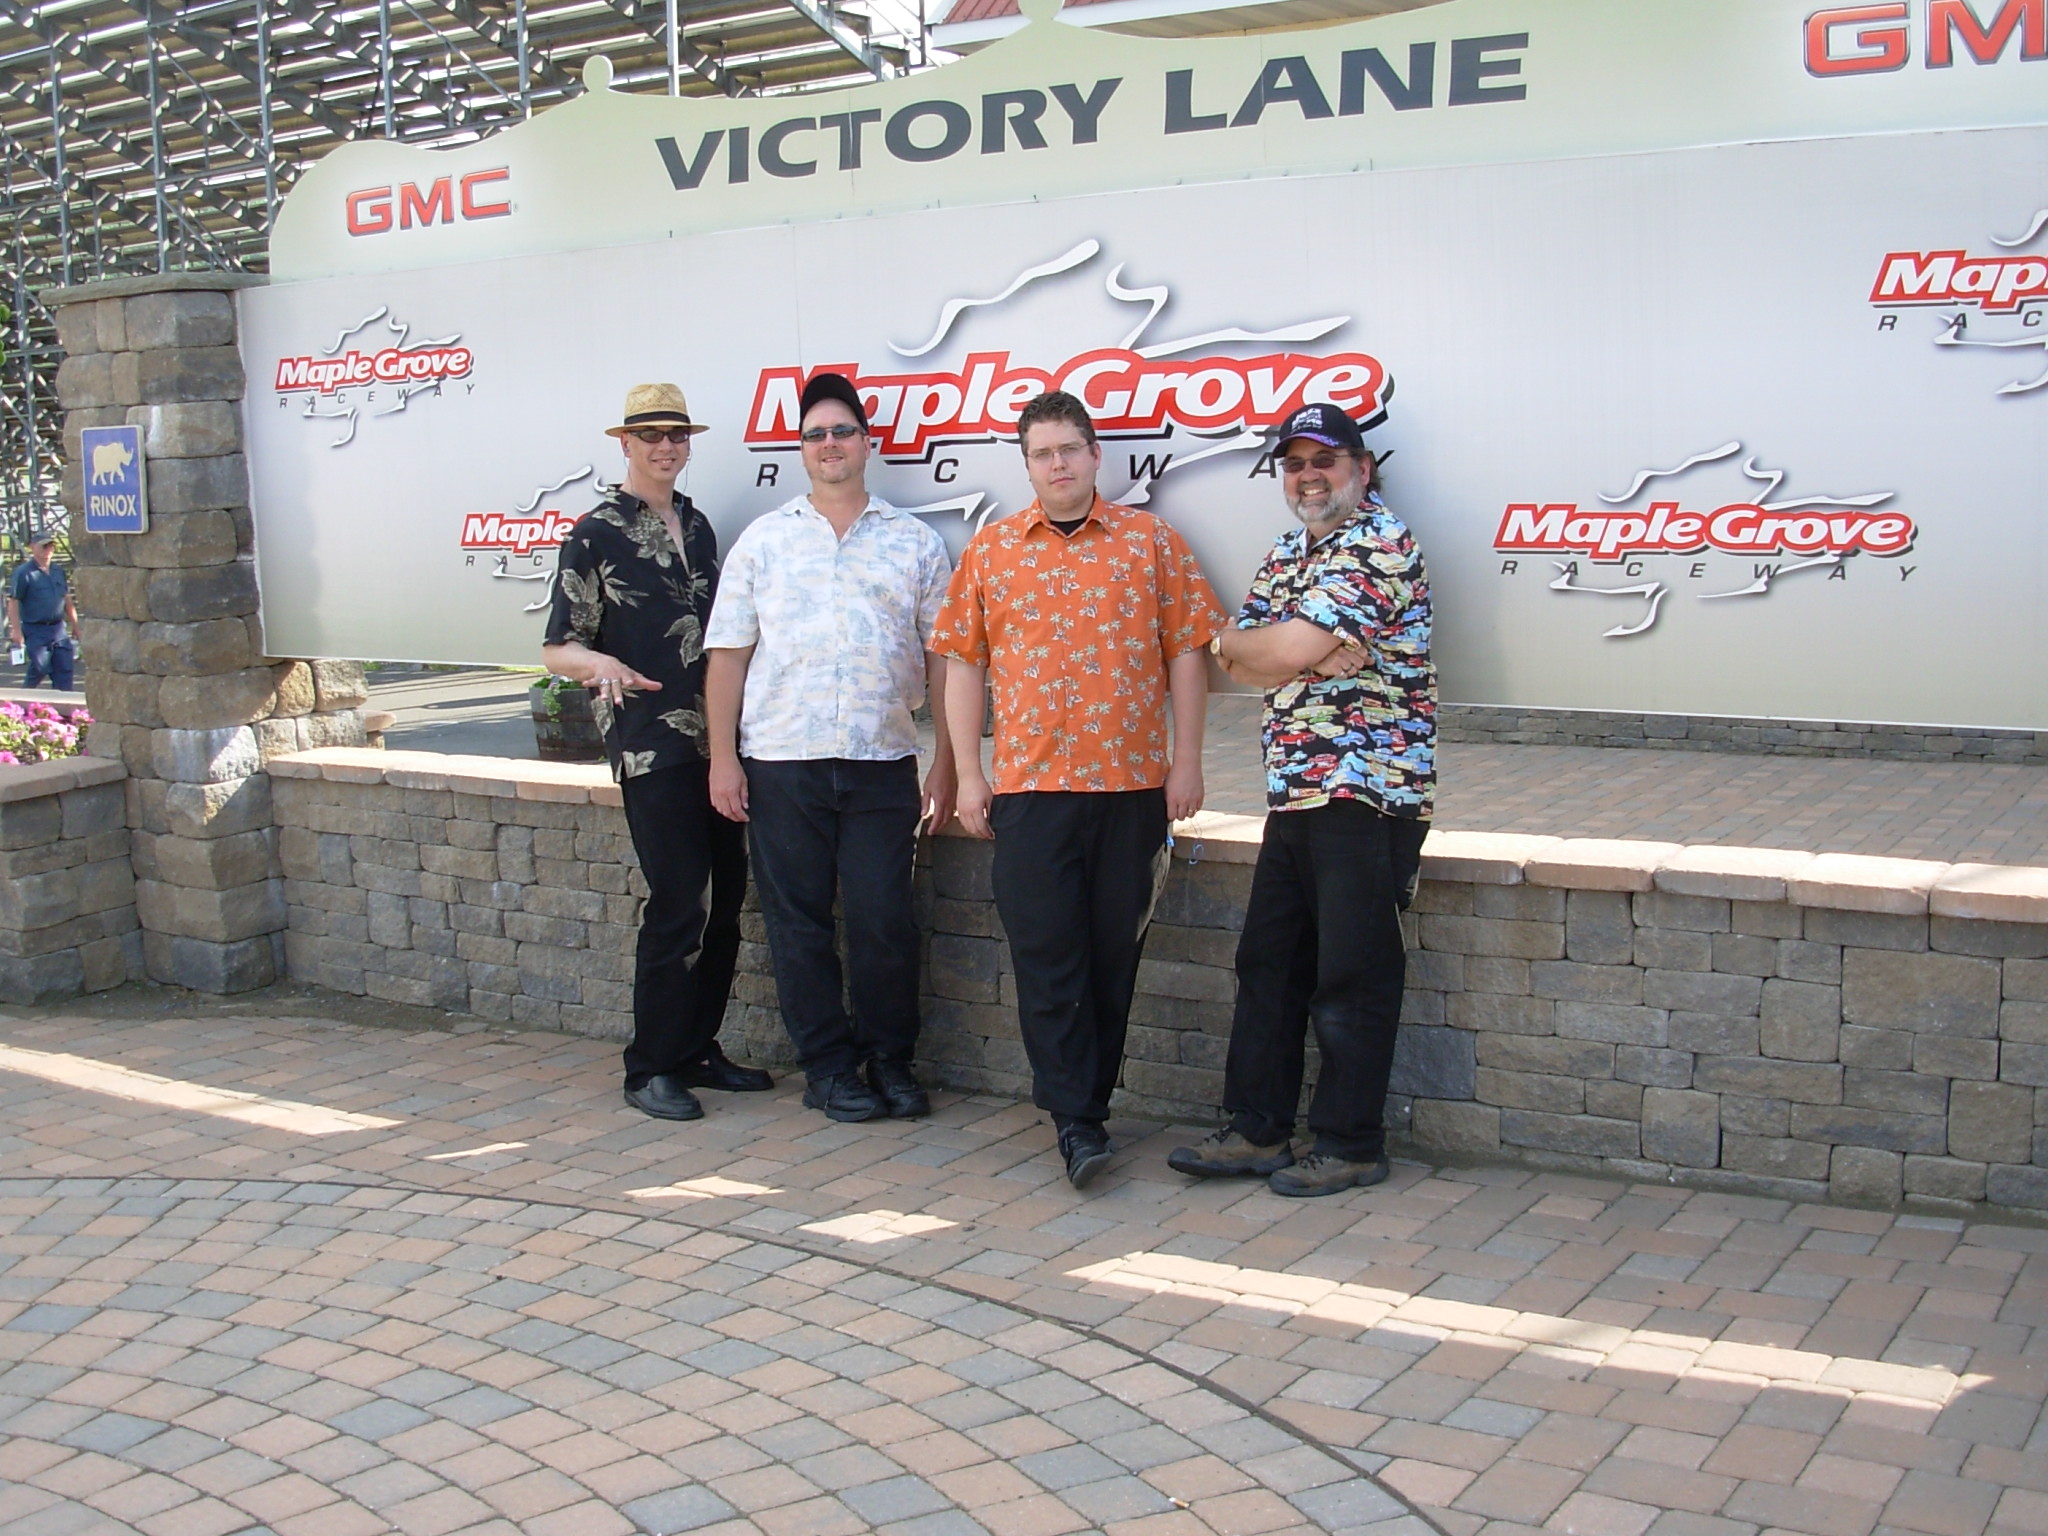 the Band at Maple Grove Raceway....
now contracted at the opening band for the SummerNationals in August
